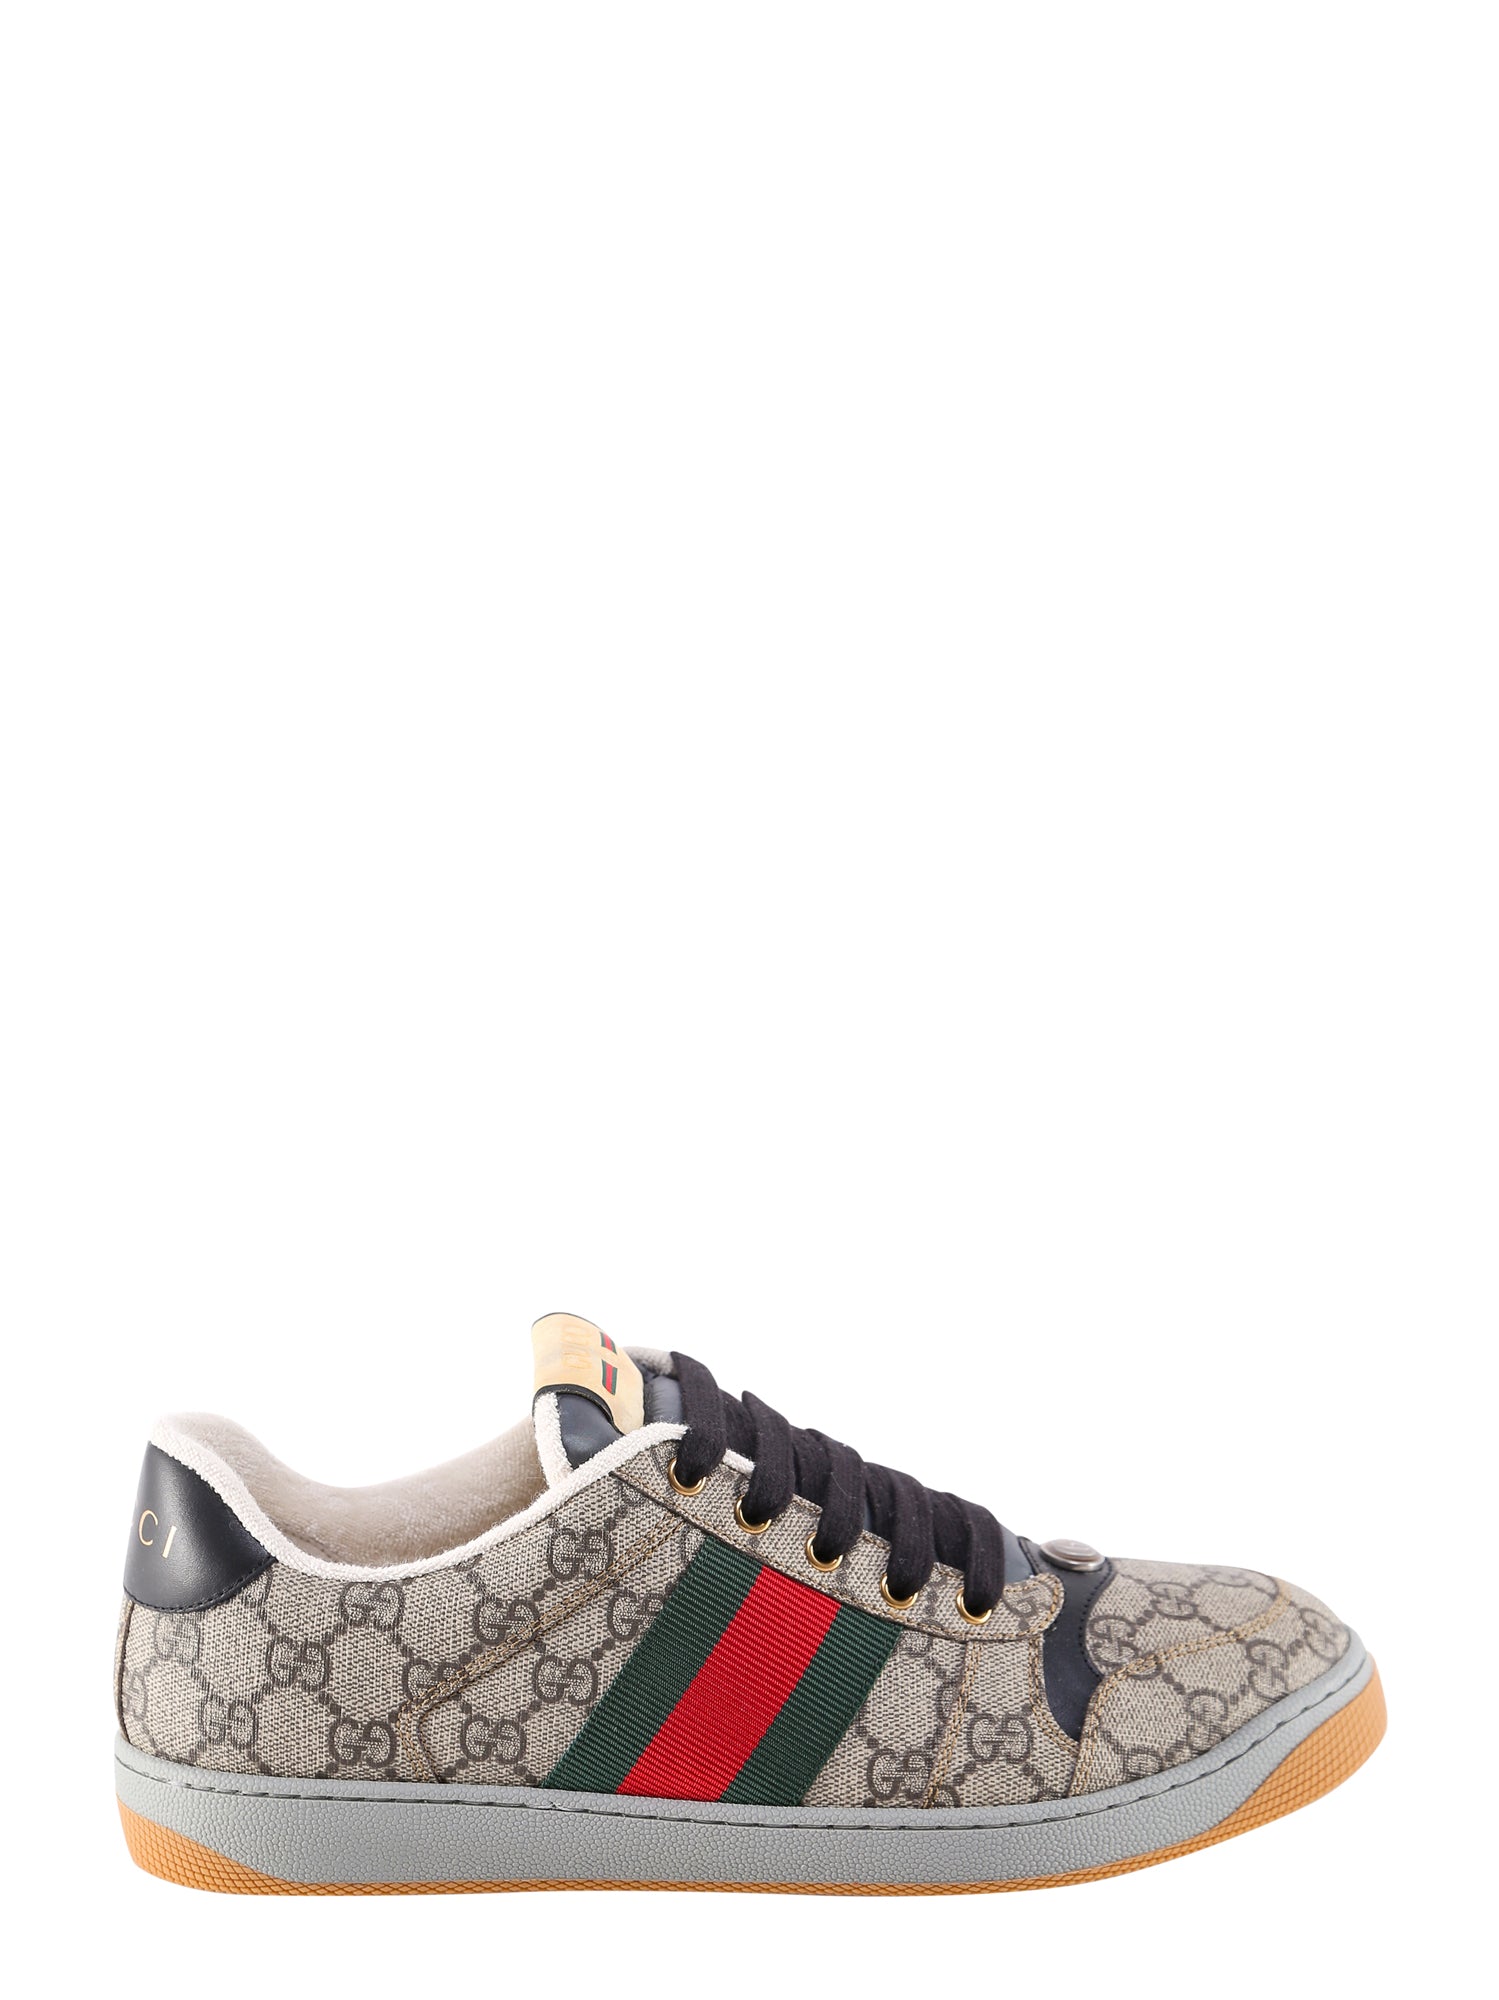 Shop Gucci Screener Gg Supreme Fabric And Leather Sneakers